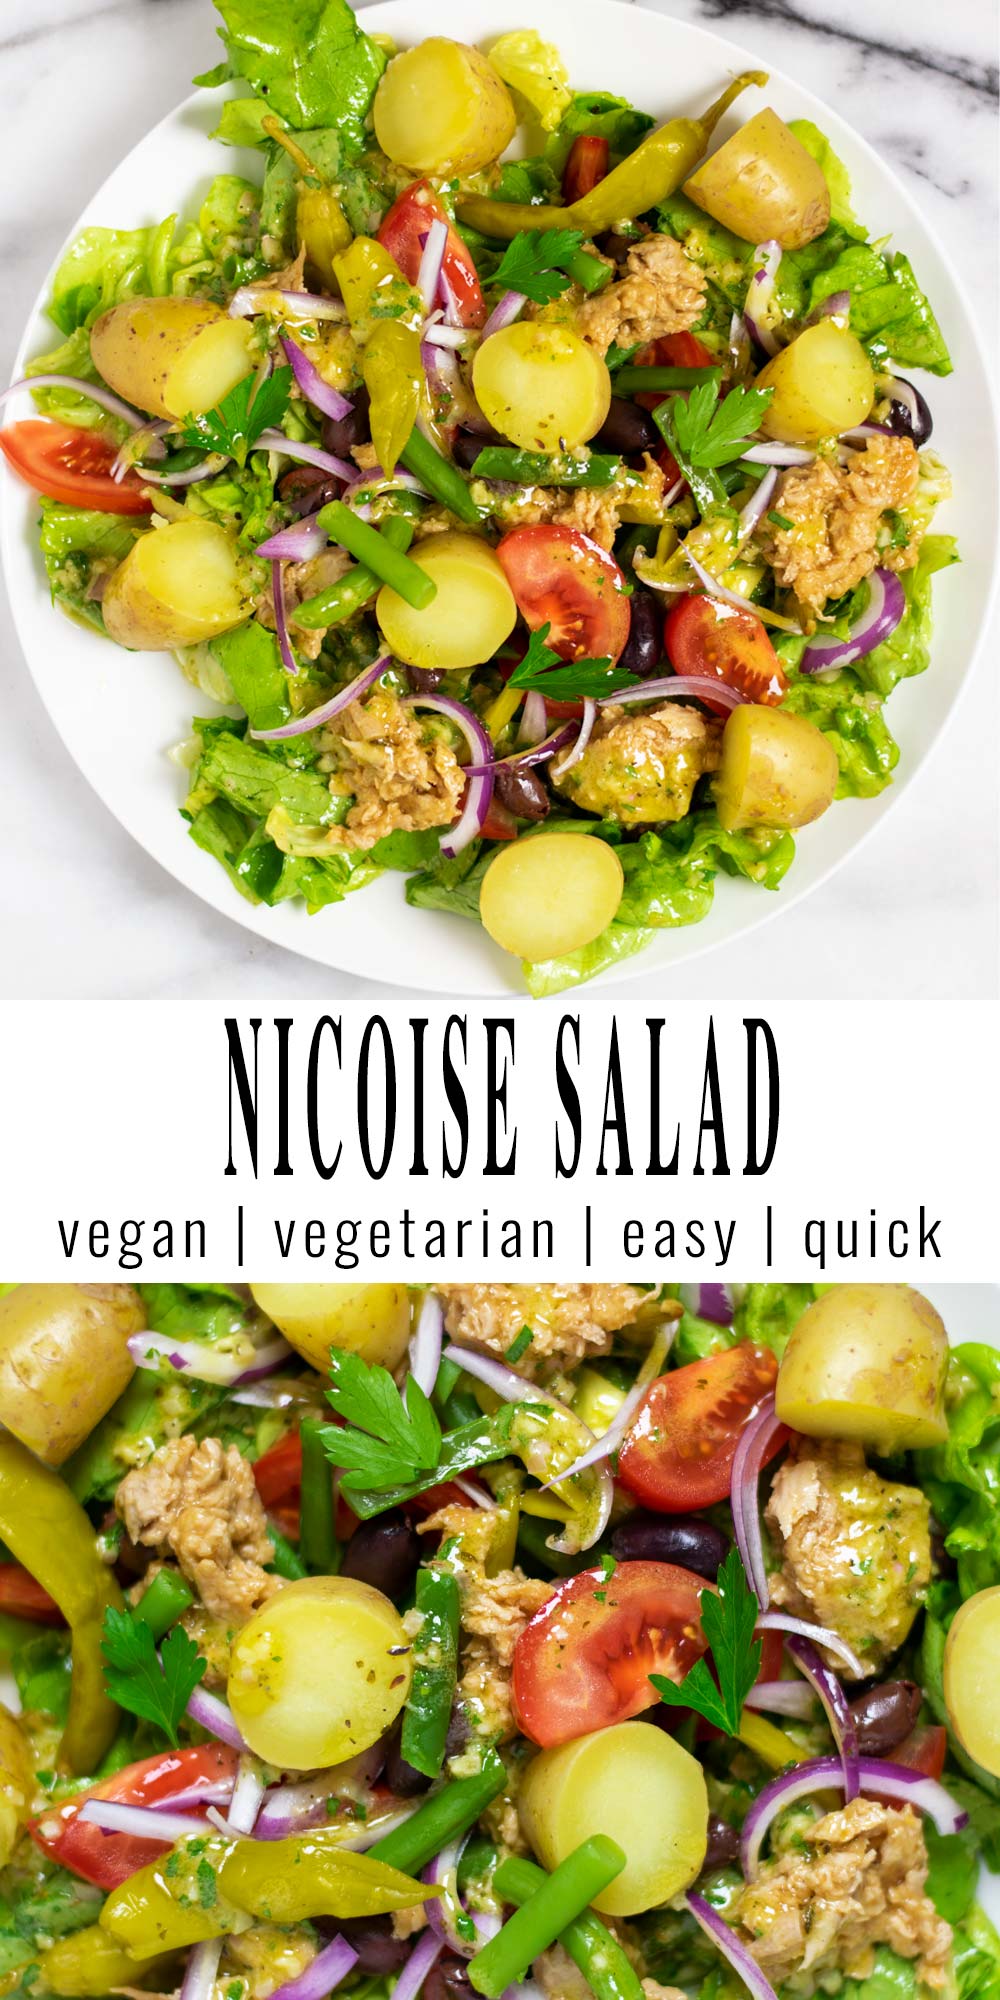 Collage of two pictures of the Nicoise salad, with recipe title text.